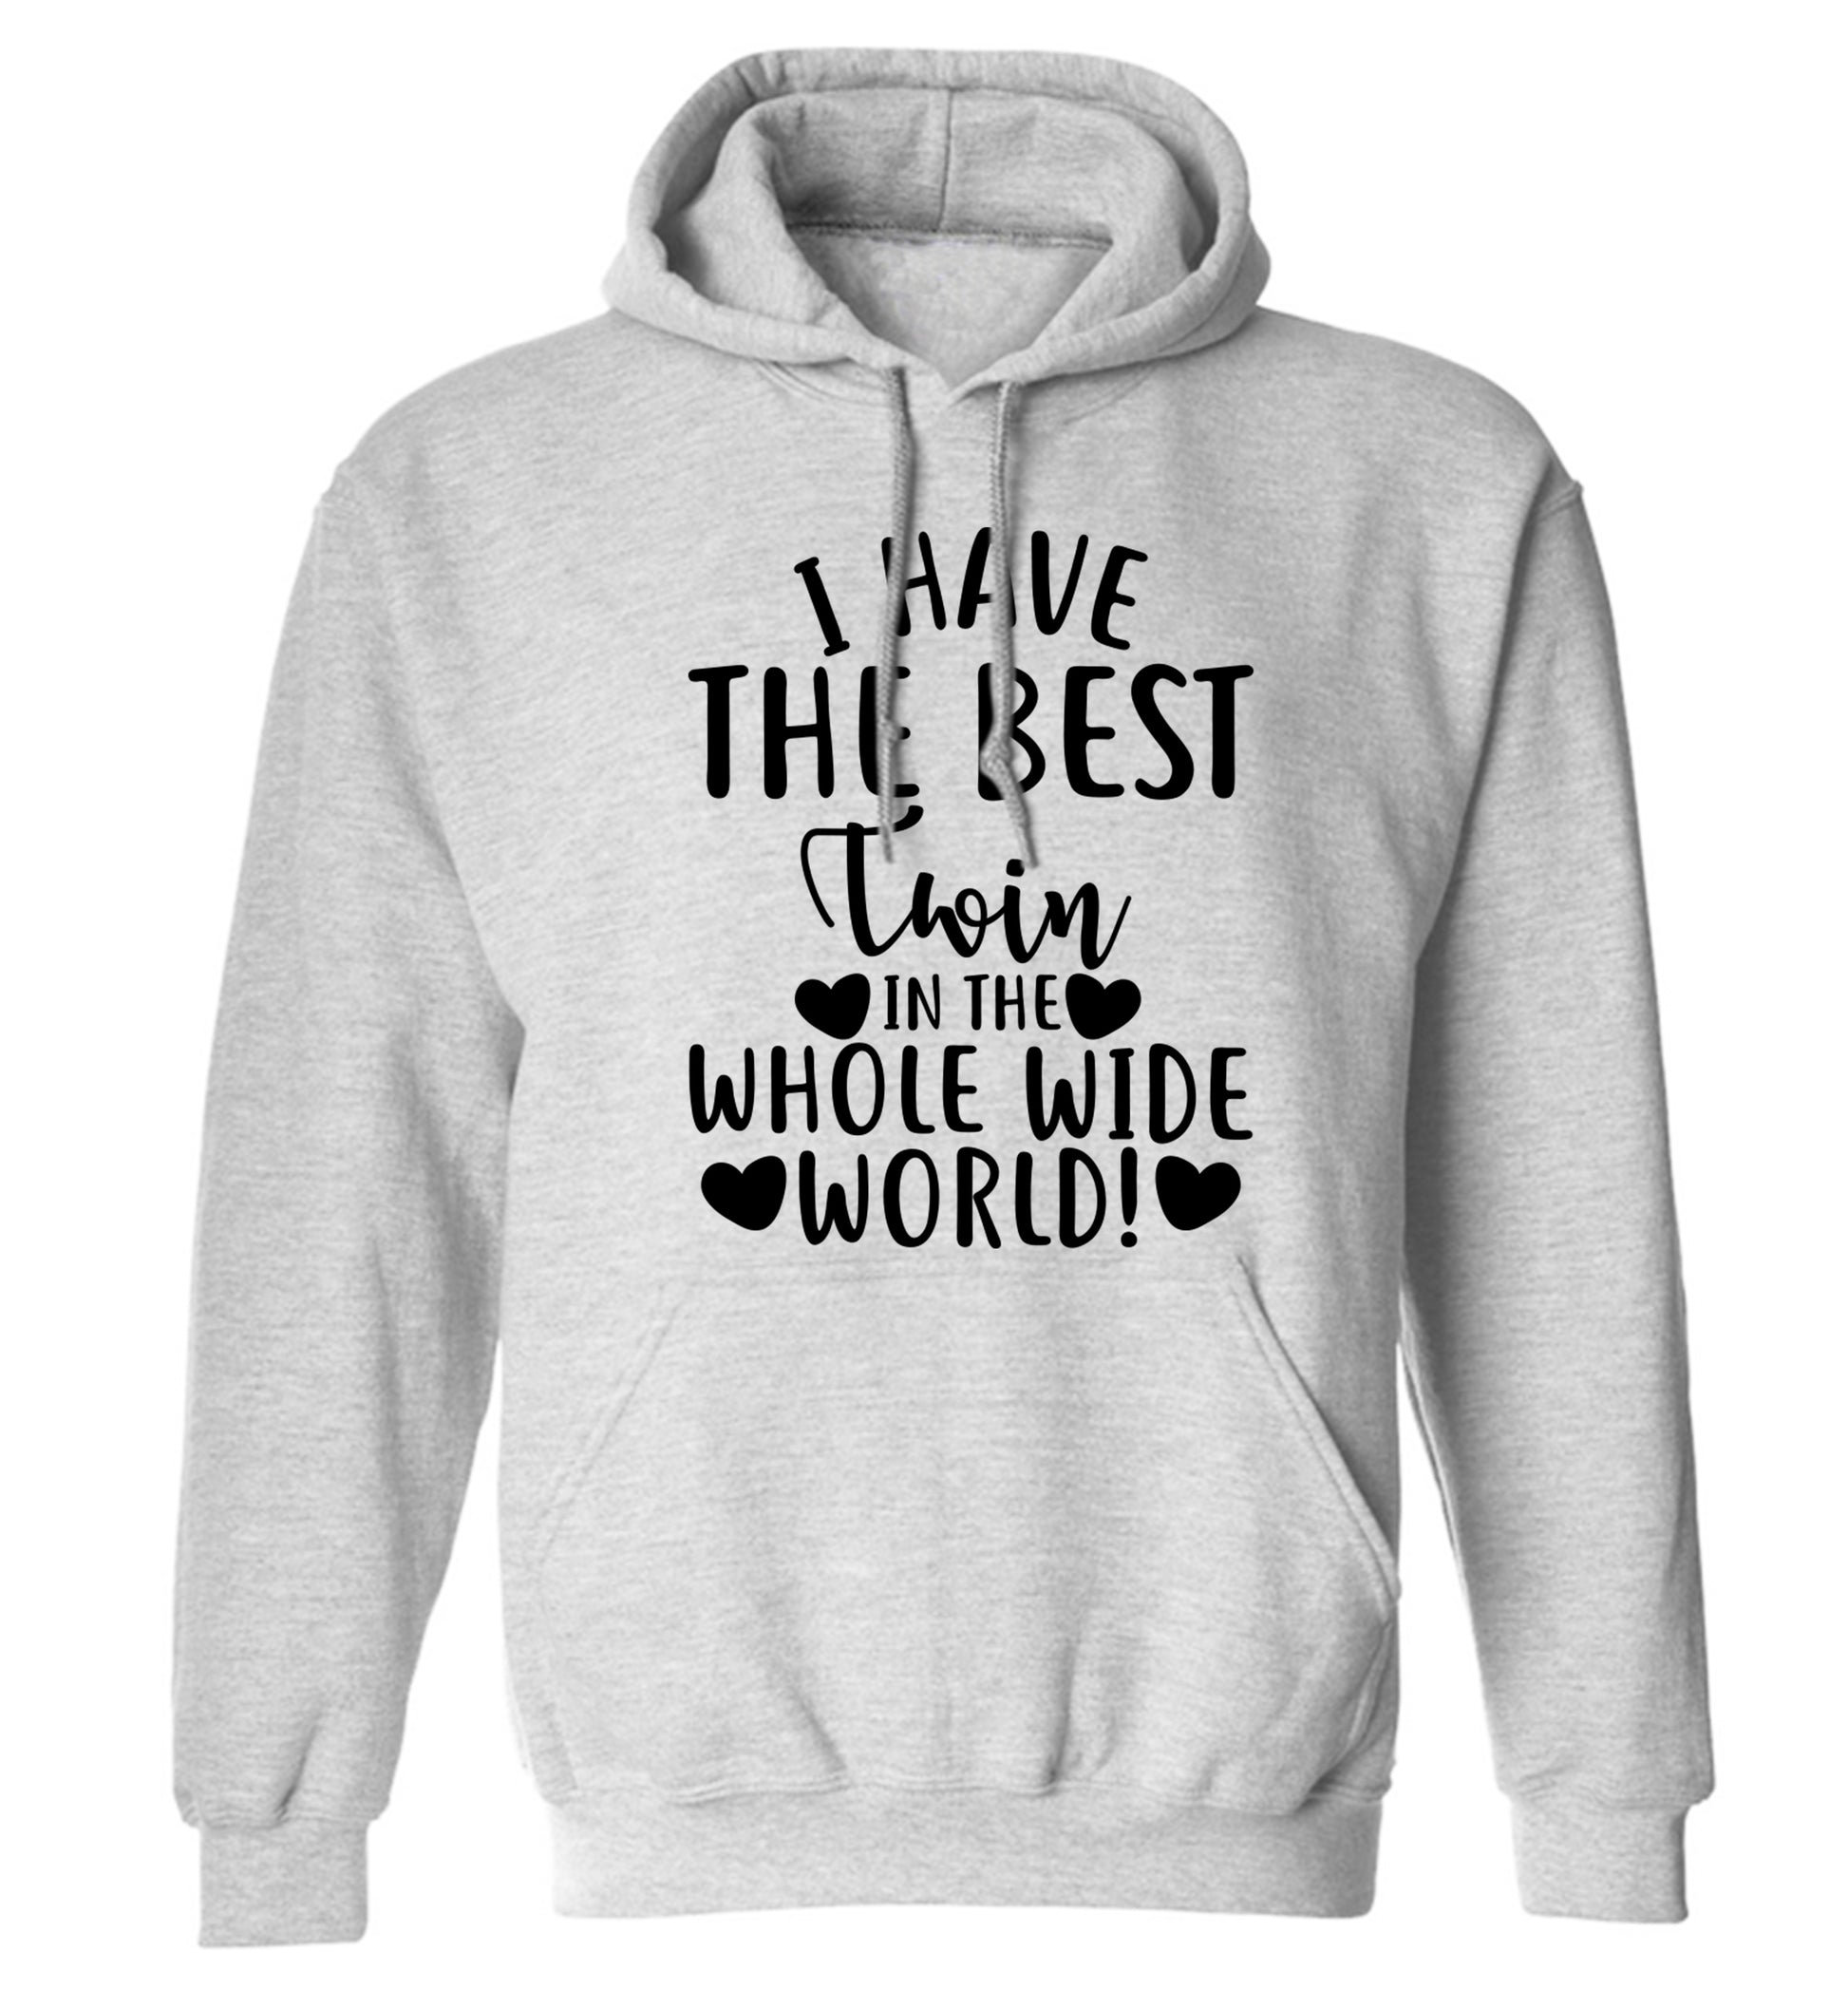 I have the best twin in the whole wide world! adults unisex grey hoodie 2XL